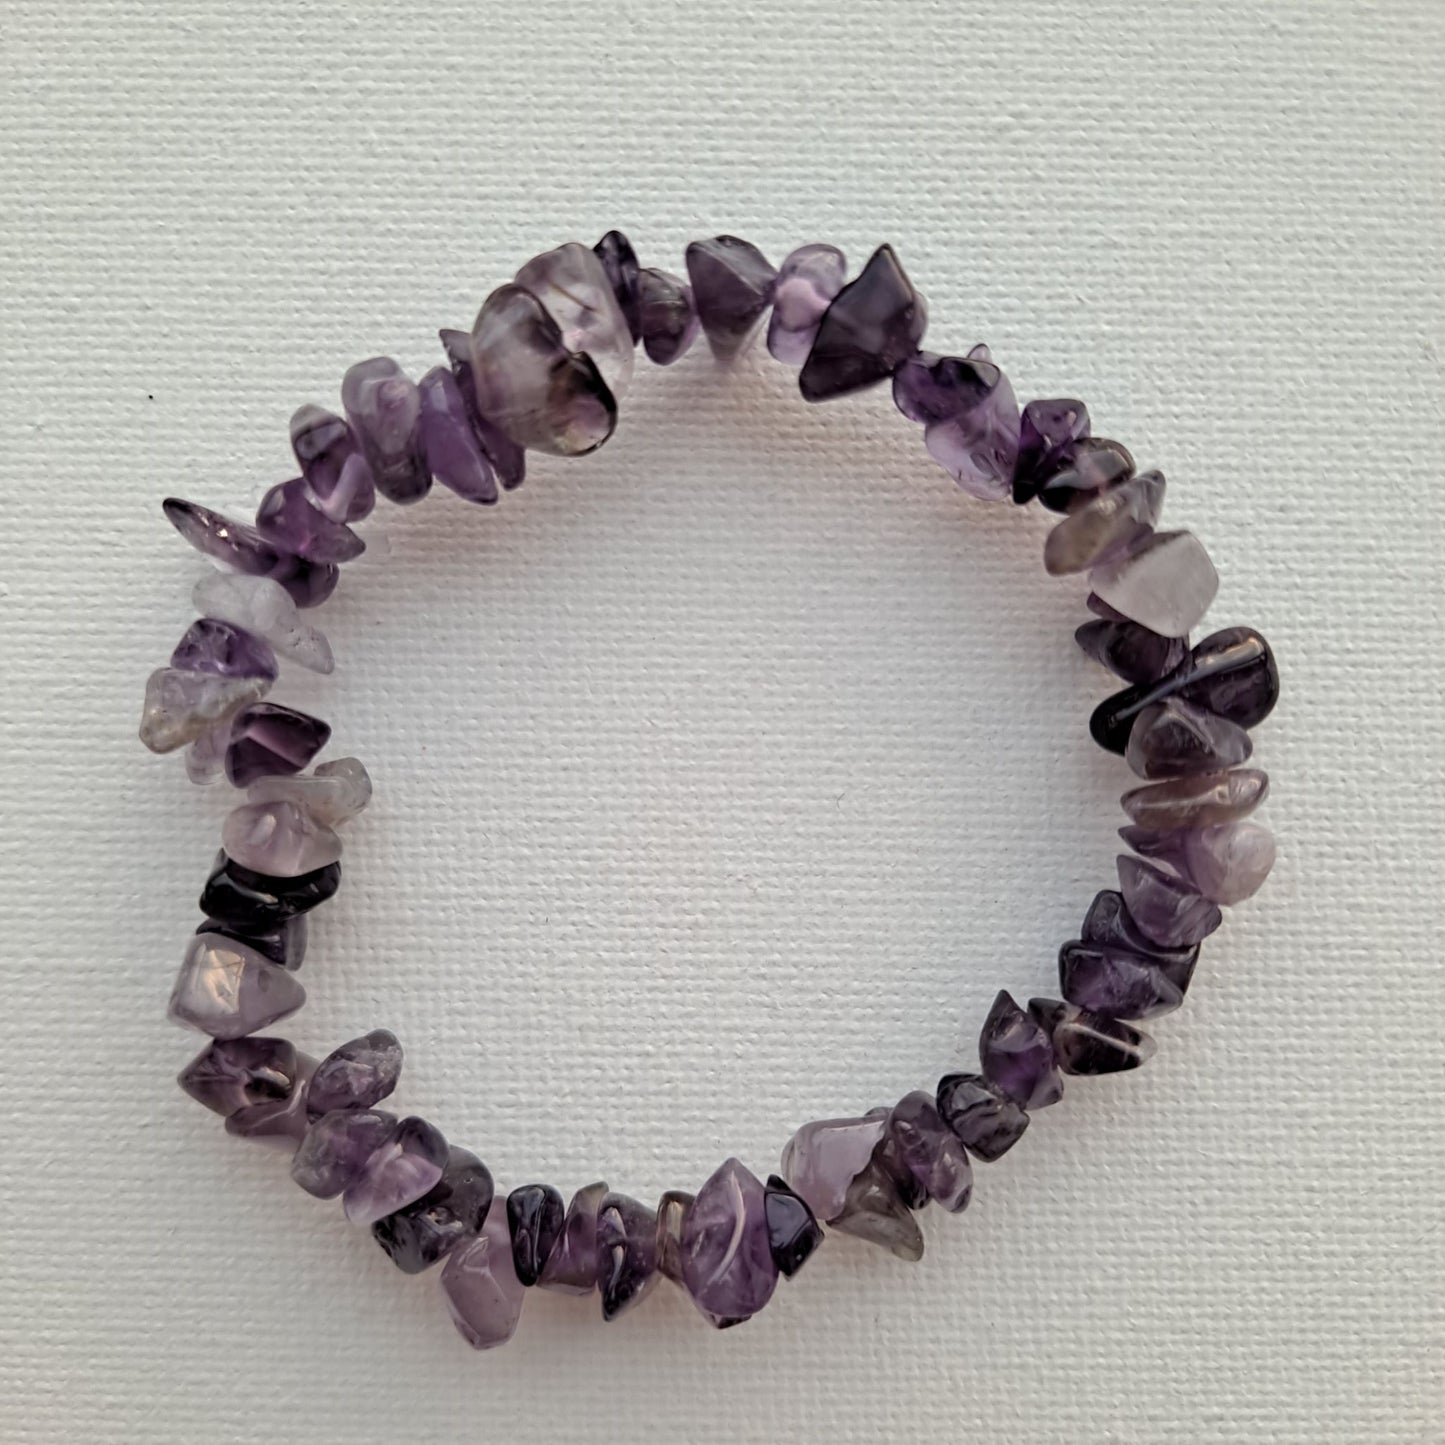 Dumi's Crystals Amethyst Chip Bracelet: Handcrafted with genuine Amethyst chips for inner peace, mental clarity, and a touch of bohemian style.